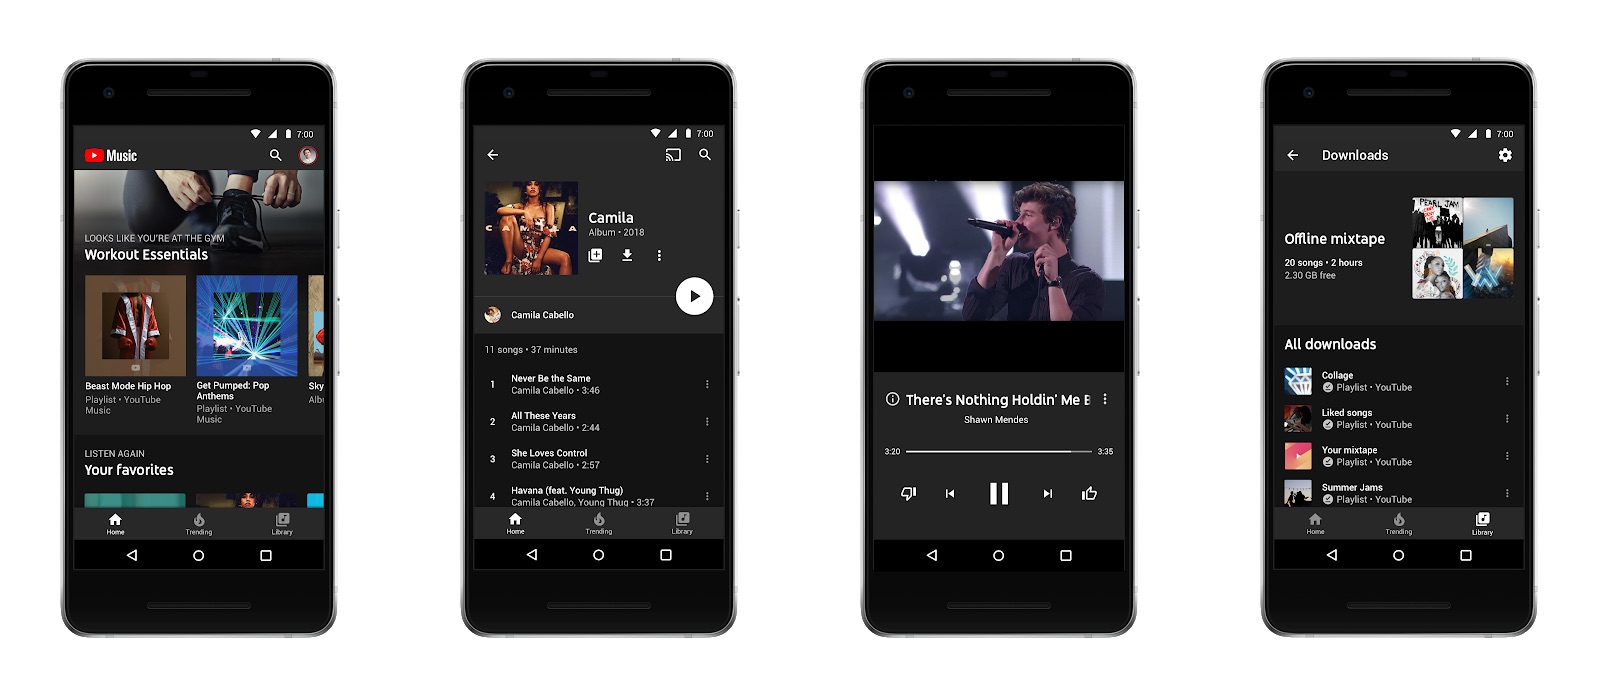 Google introduces YouTube Music and YouTube Premium